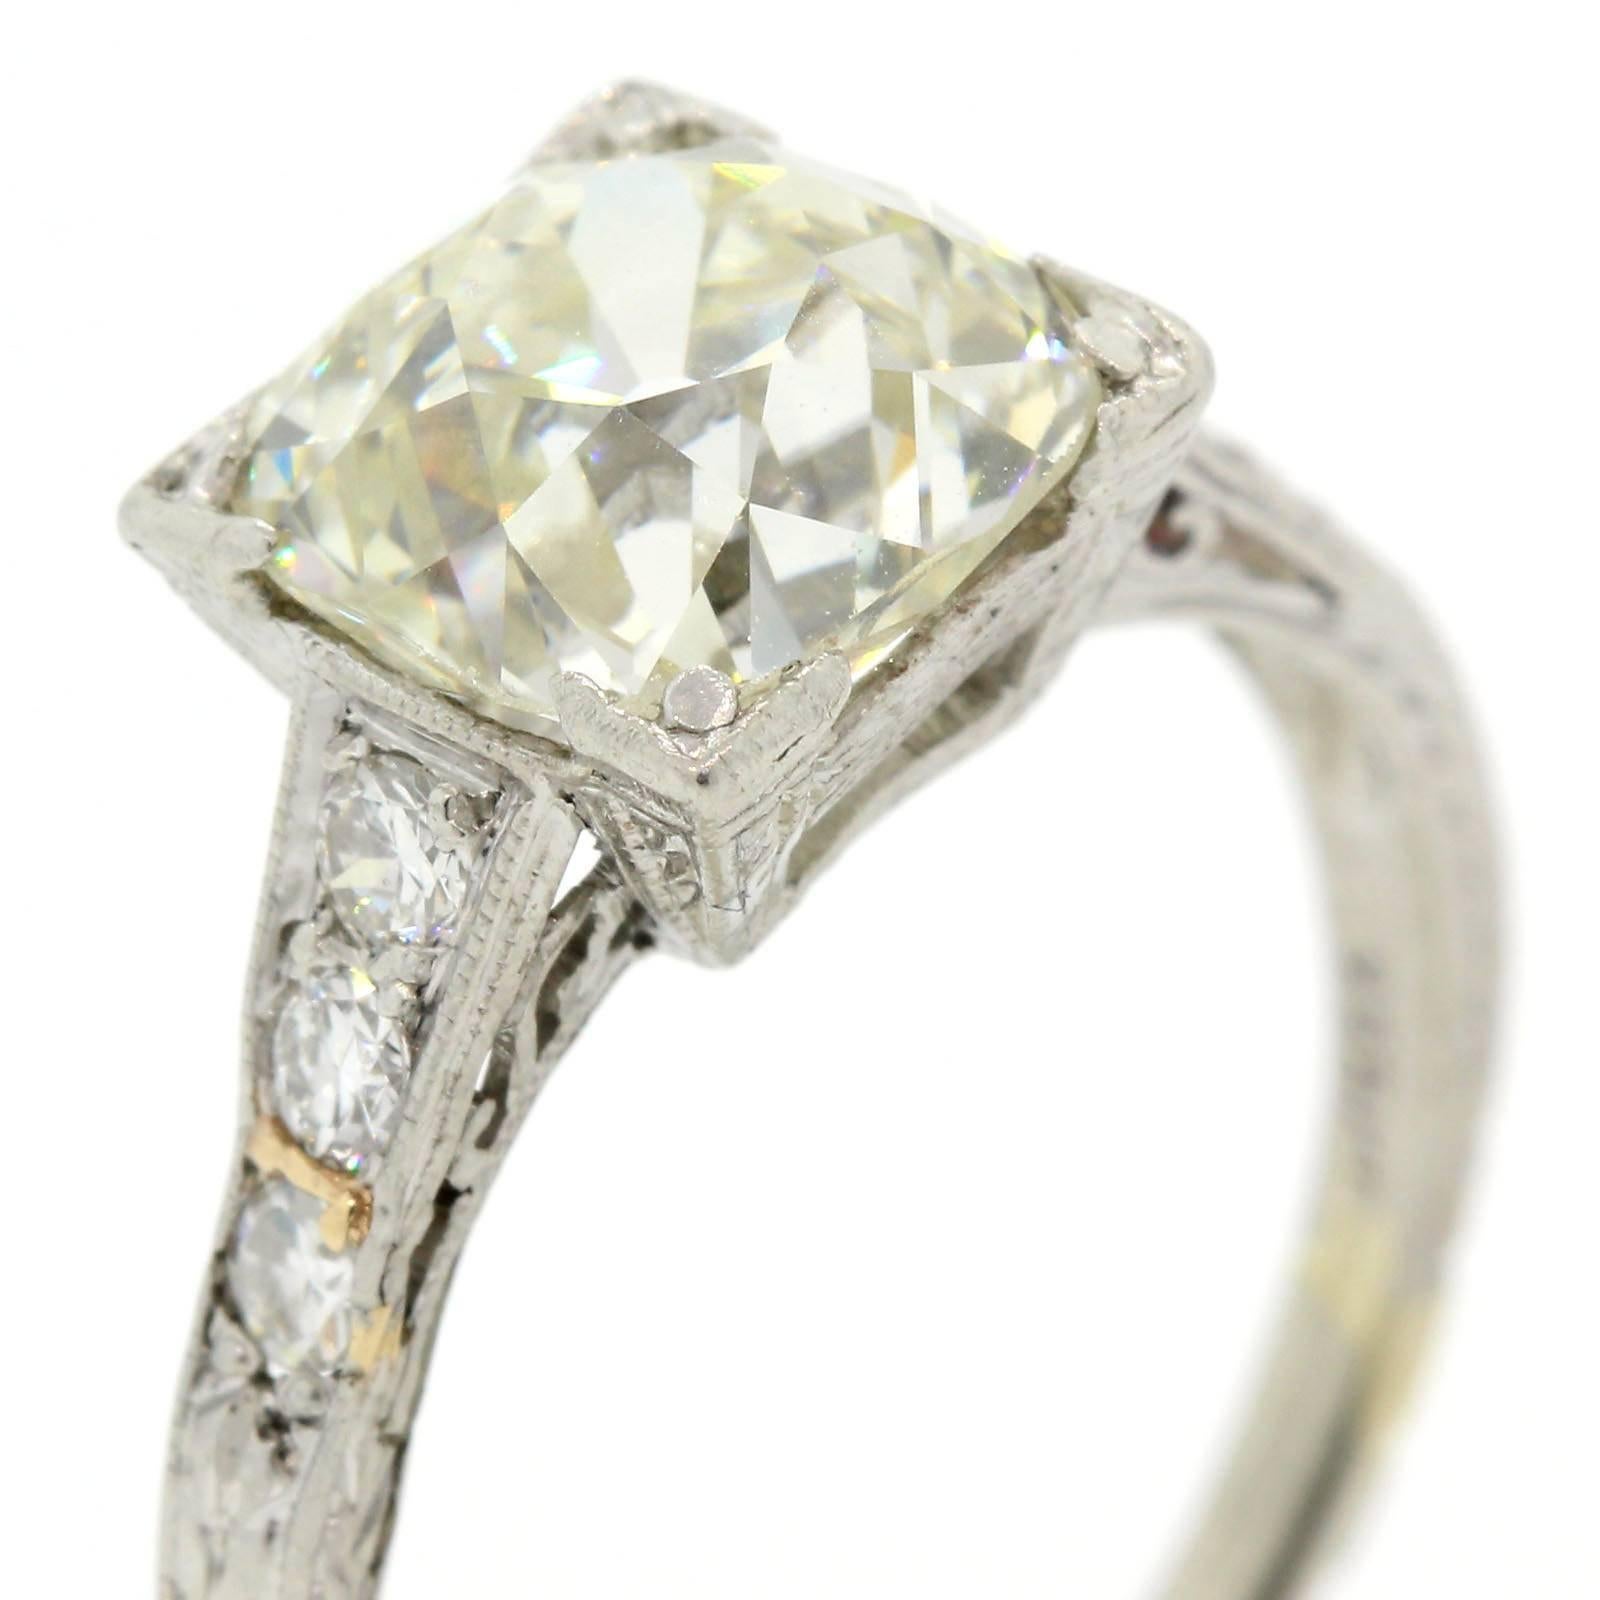 A timeless platinum ring featuring a E.G.L.  US 2.67 carat Old European Cut Diamond of K color - VS2 clarity.  The coveted platinum setting is accented with 0.22 carat of Transitional Cut Diamonds and is enhanced with beautifully preserved hand